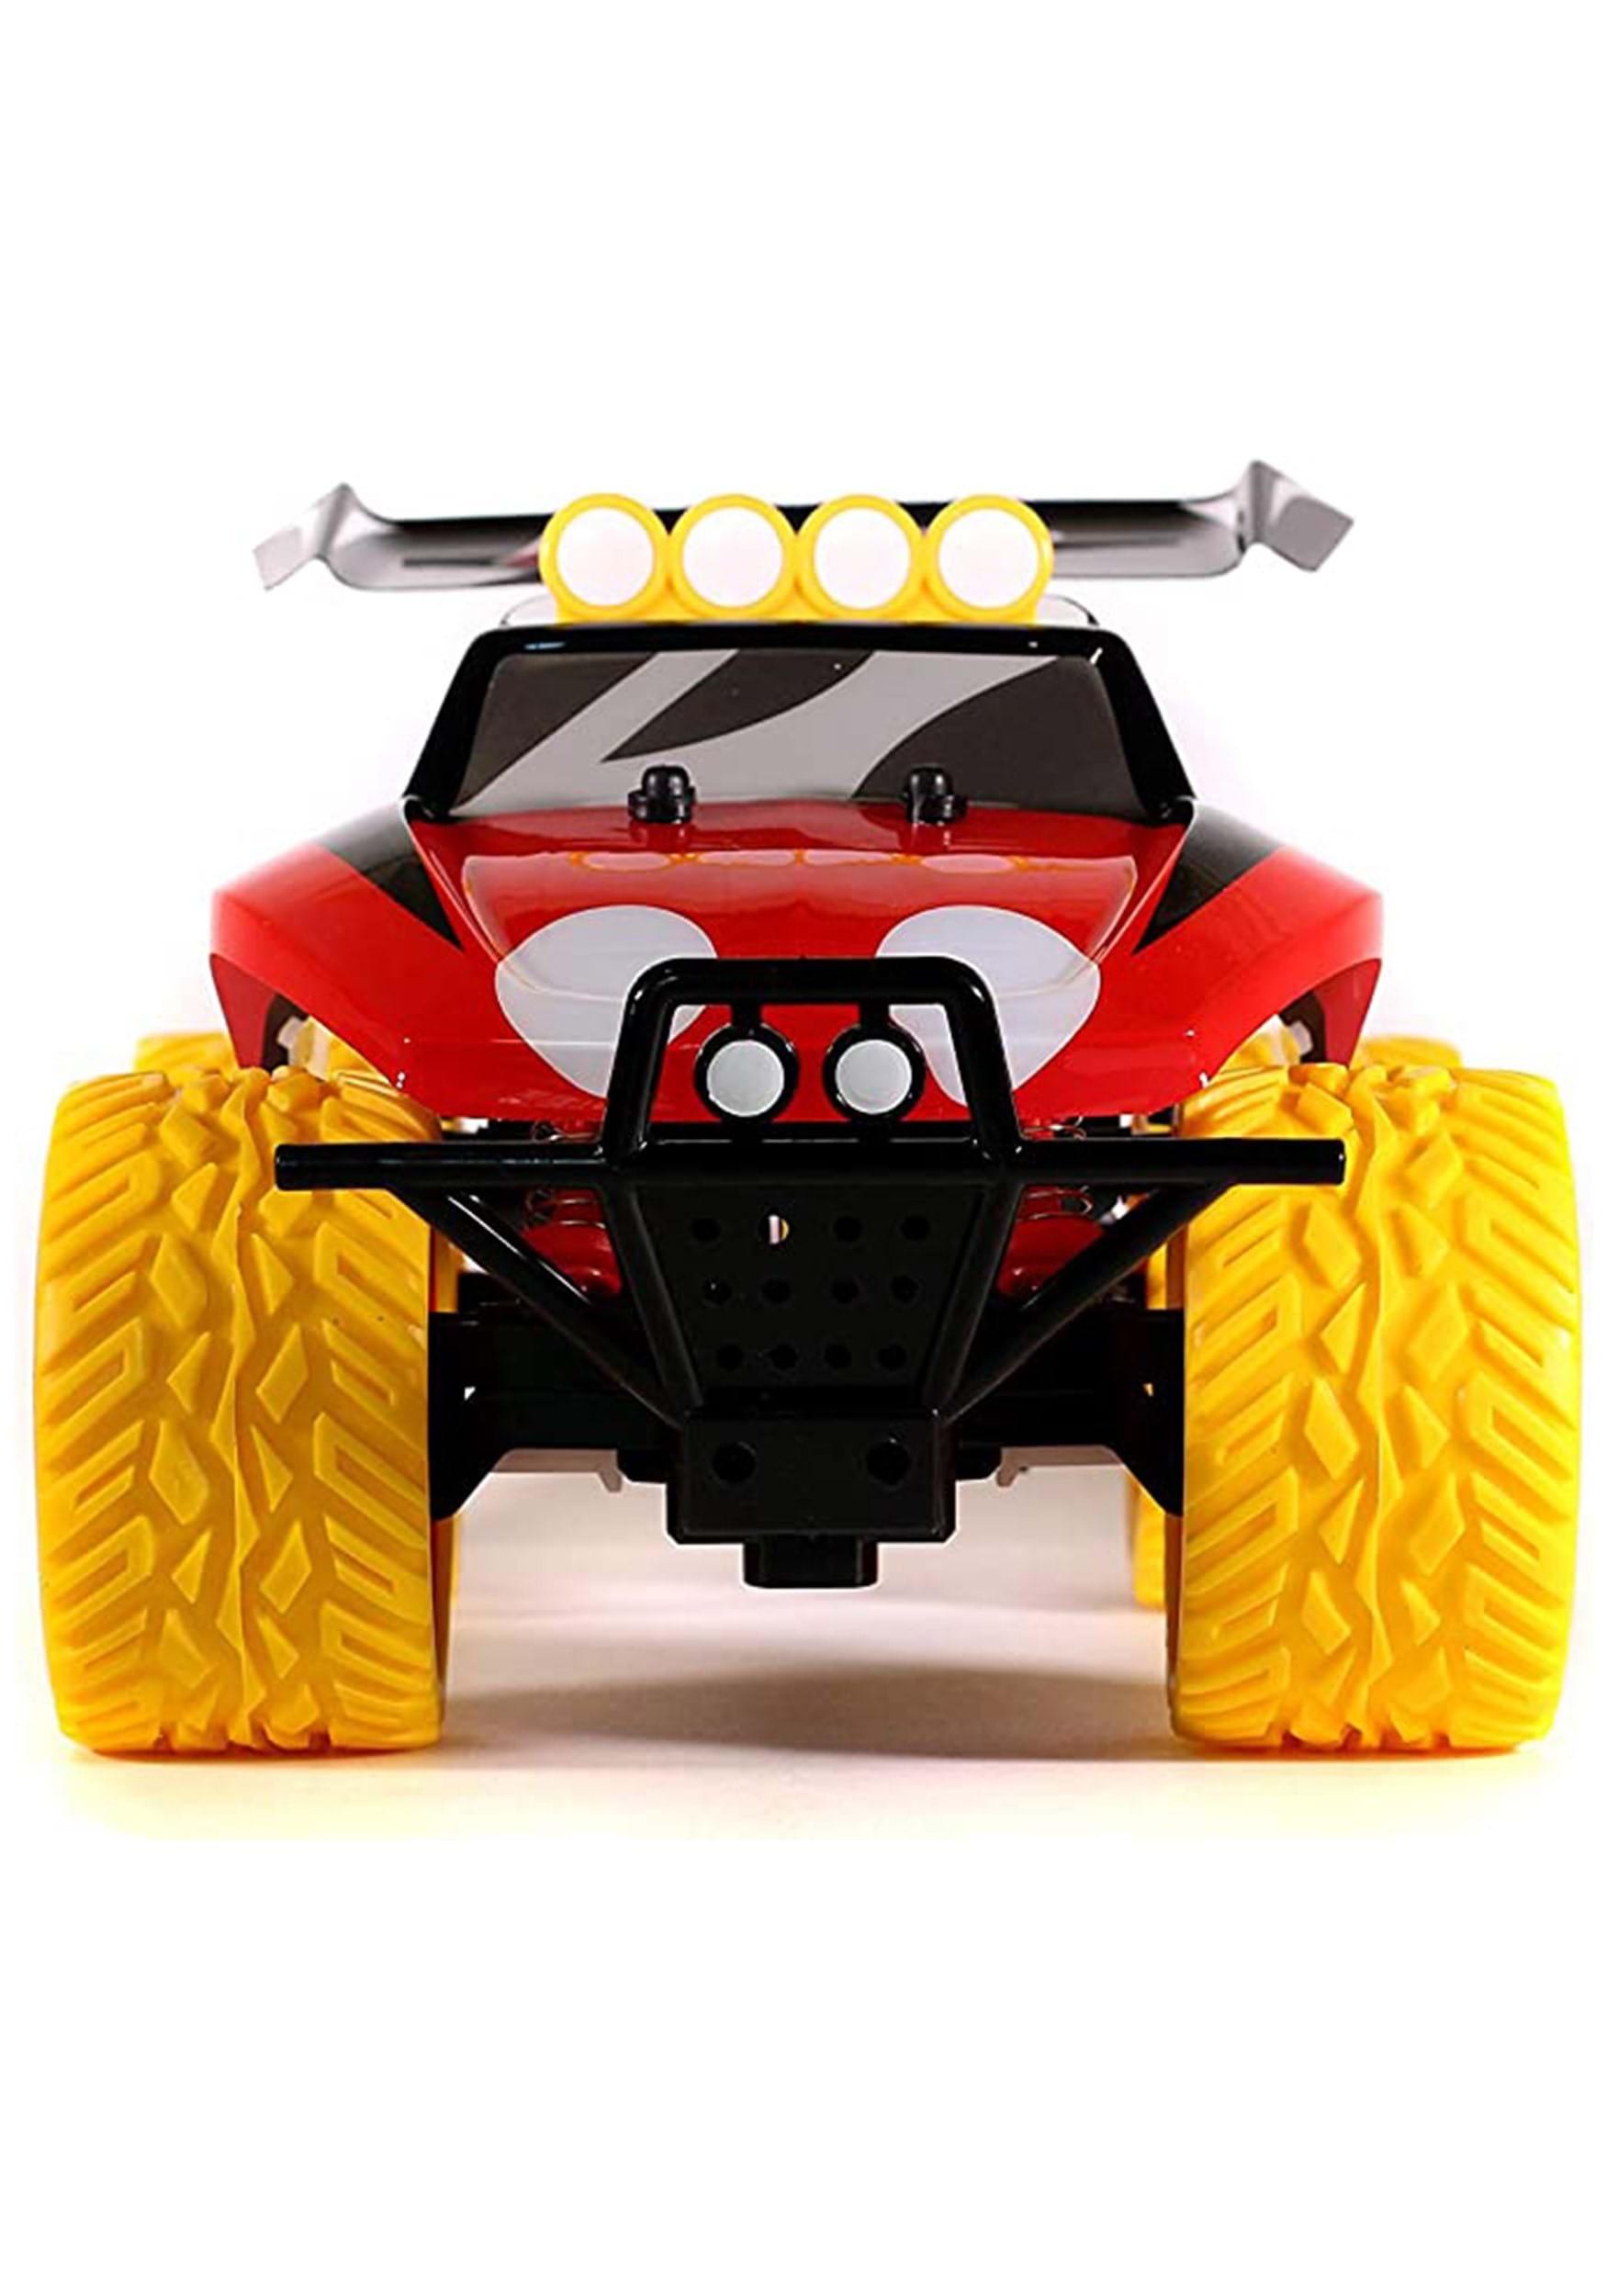 Disney Mickey Mouse Buggy 1:14 Scale Remote Control Vehicle